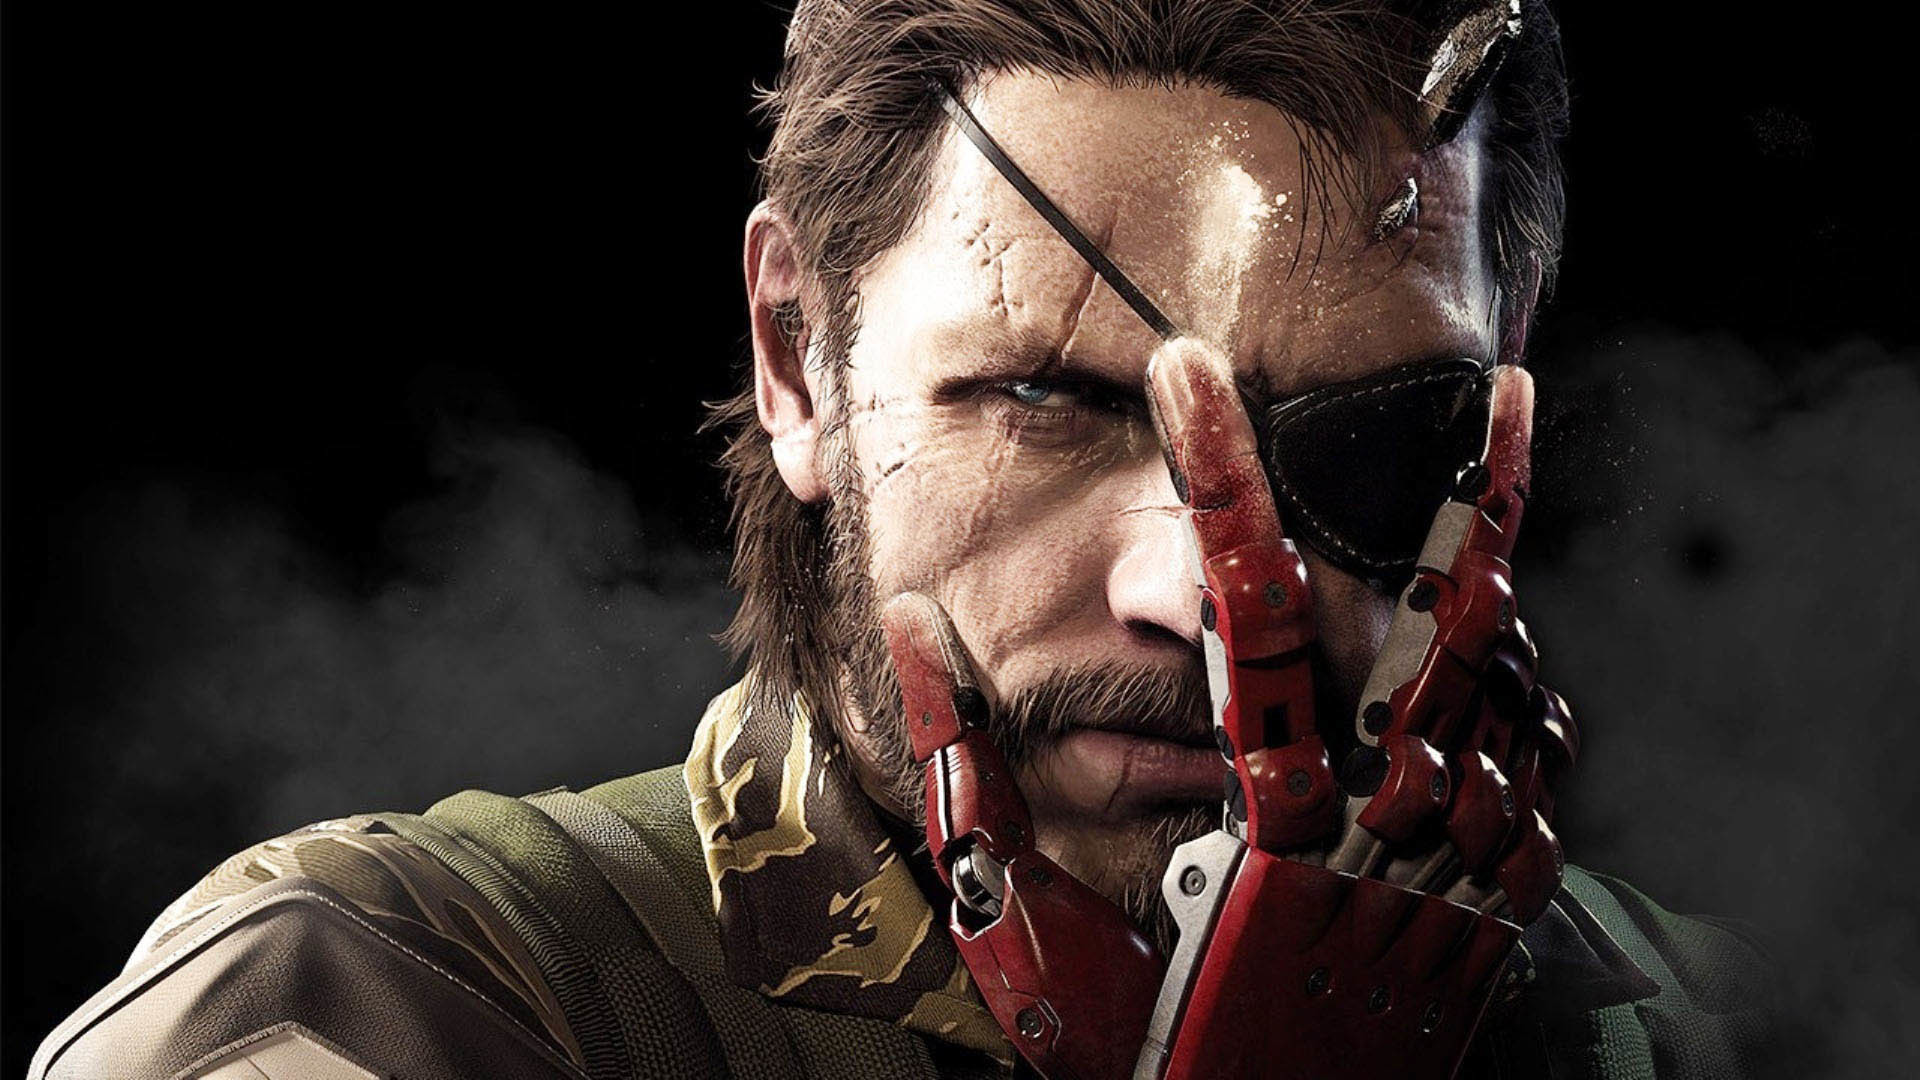 1920x1080 20 Minutes of Metal Gear Solid The Phantom Pain Gameplay - PAX Prime 2015